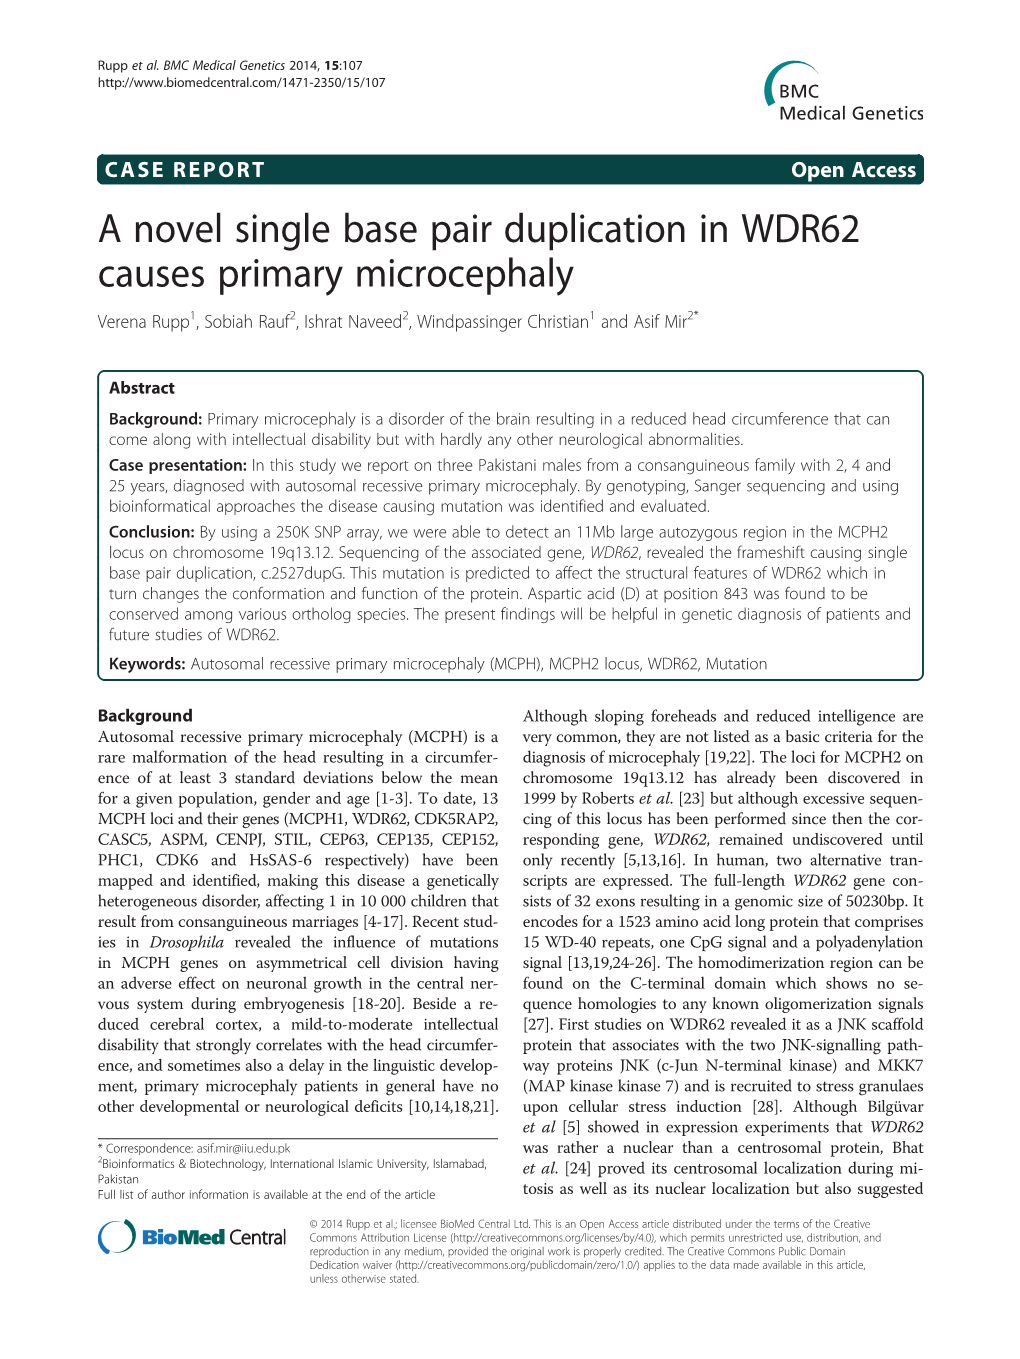 A Novel Single Base Pair Duplication in WDR62 Causes Primary Microcephaly Verena Rupp1, Sobiah Rauf2, Ishrat Naveed2, Windpassinger Christian1 and Asif Mir2*